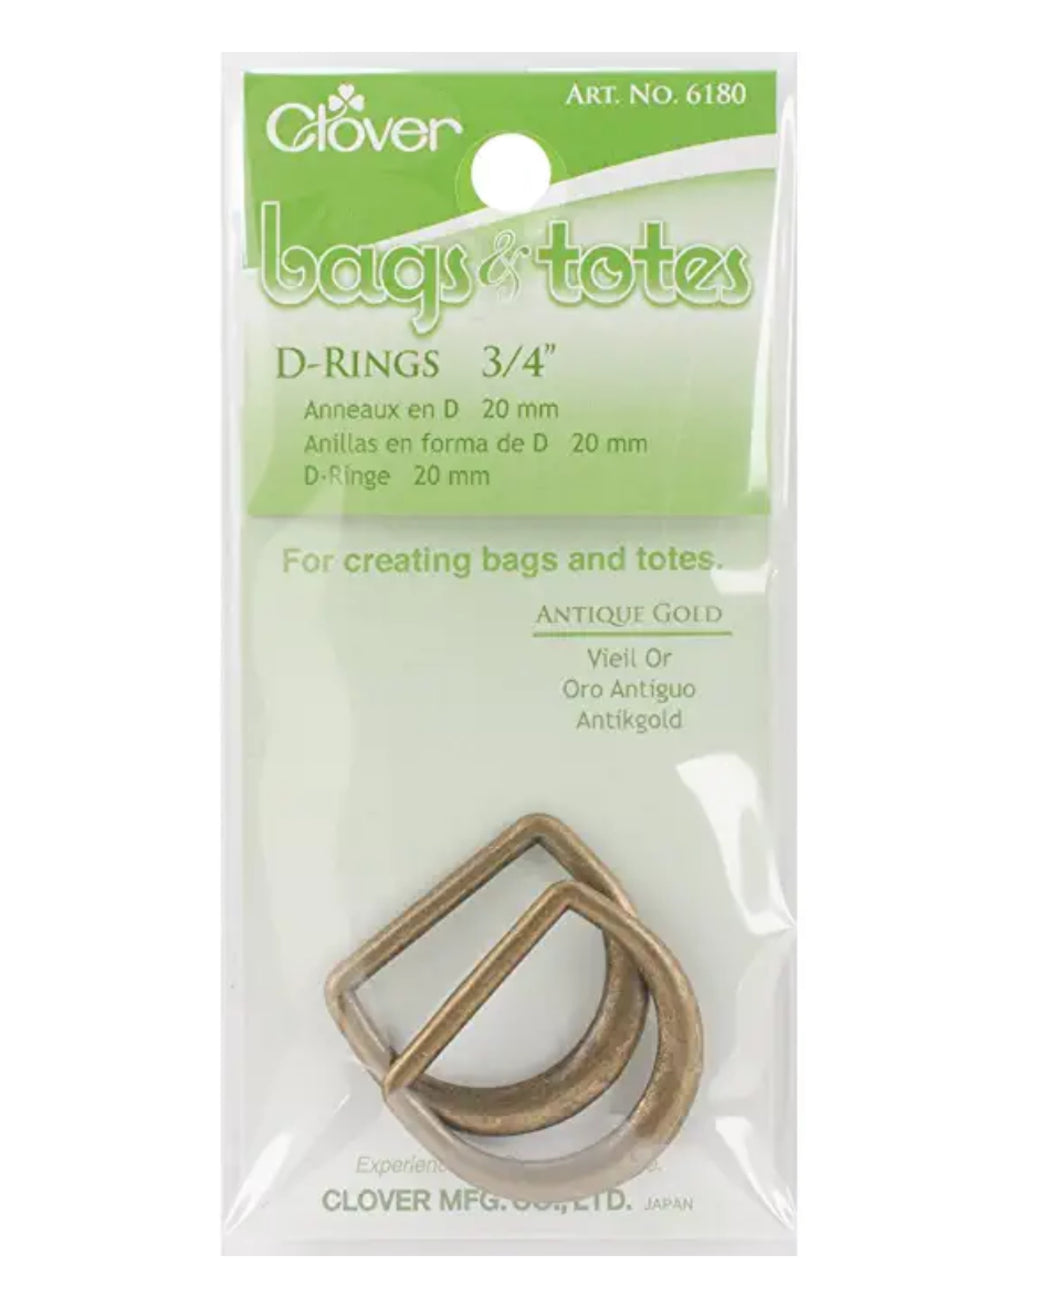 D-Rings 3/4" Antique Gold - Zipper and Thread